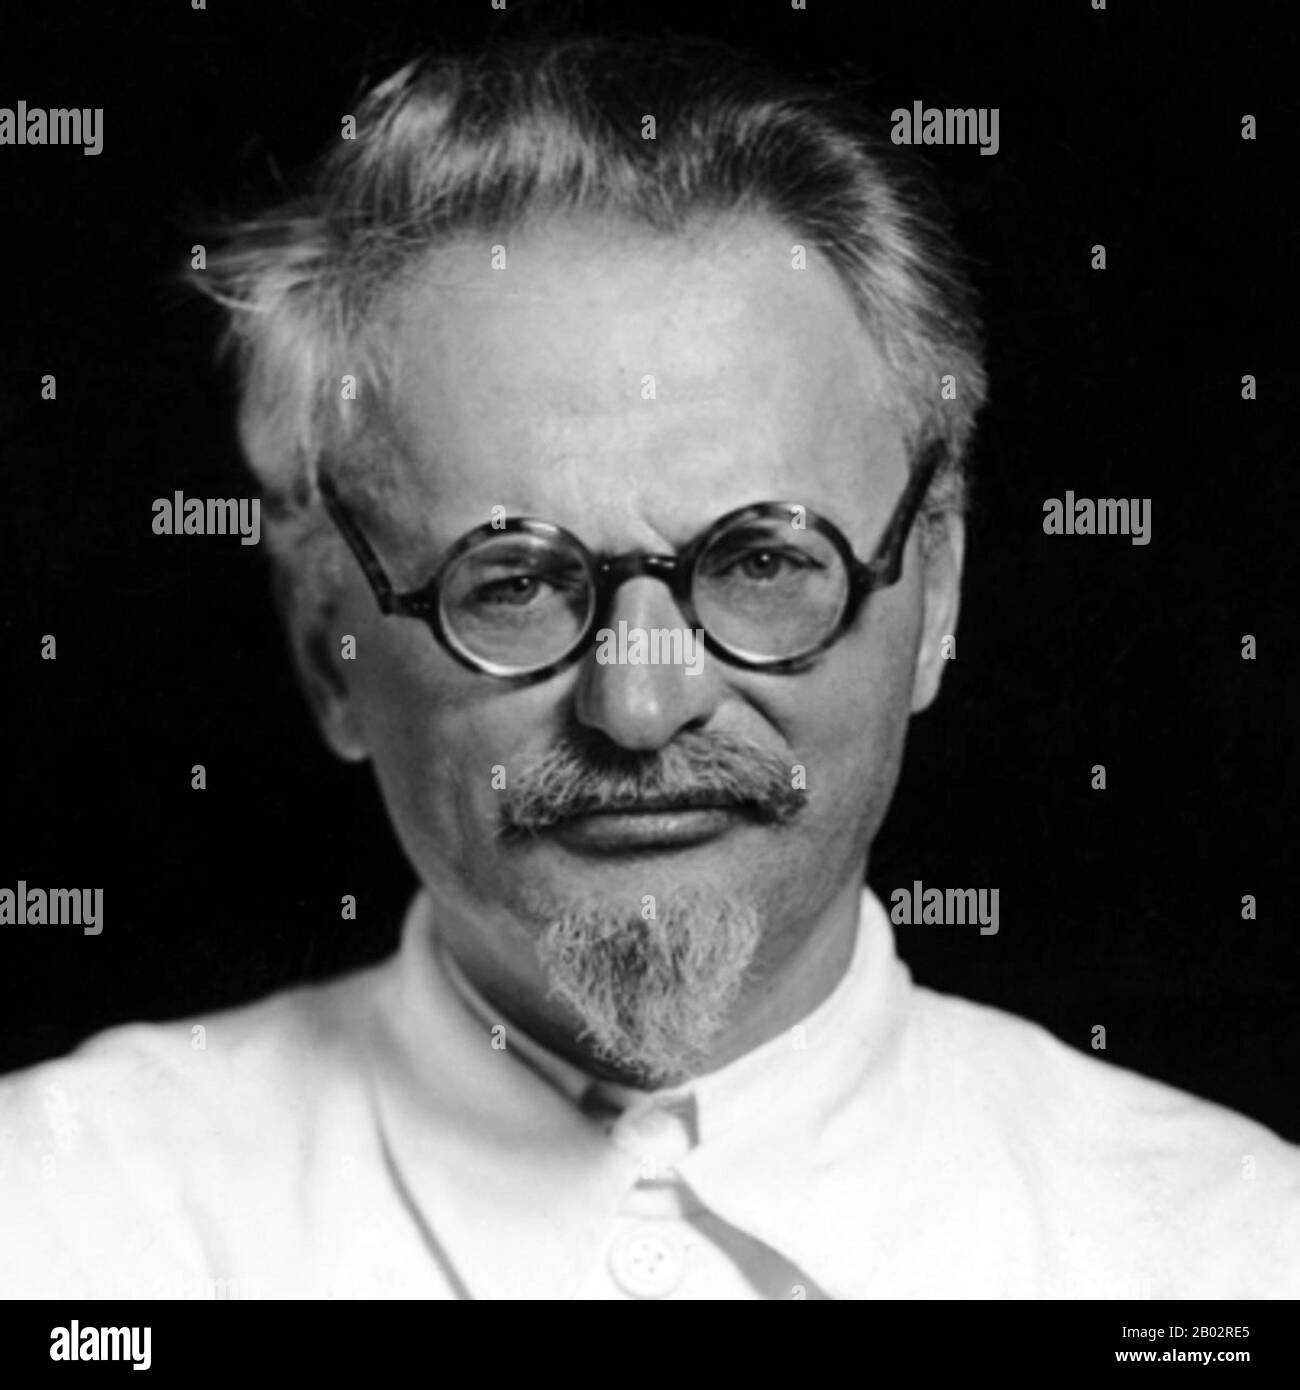 Leon Trotsky, born Lev Davidovich Bronshtein (7 November 1879 – 21 August 1940) was a Russian Marxist revolutionary and theorist, Soviet politician, and the founder and first leader of the Red Army.  Trotsky was initially a supporter of the Menshevik Internationalists faction of the Russian Social Democratic Labour Party. He joined the Bolsheviks immediately prior to the 1917 October Revolution, and eventually became a leader within the Party. During the early days of the Soviet Union, he served first as People's Commissar for Foreign Affairs and later as the founder and commander of the Red A Stock Photo